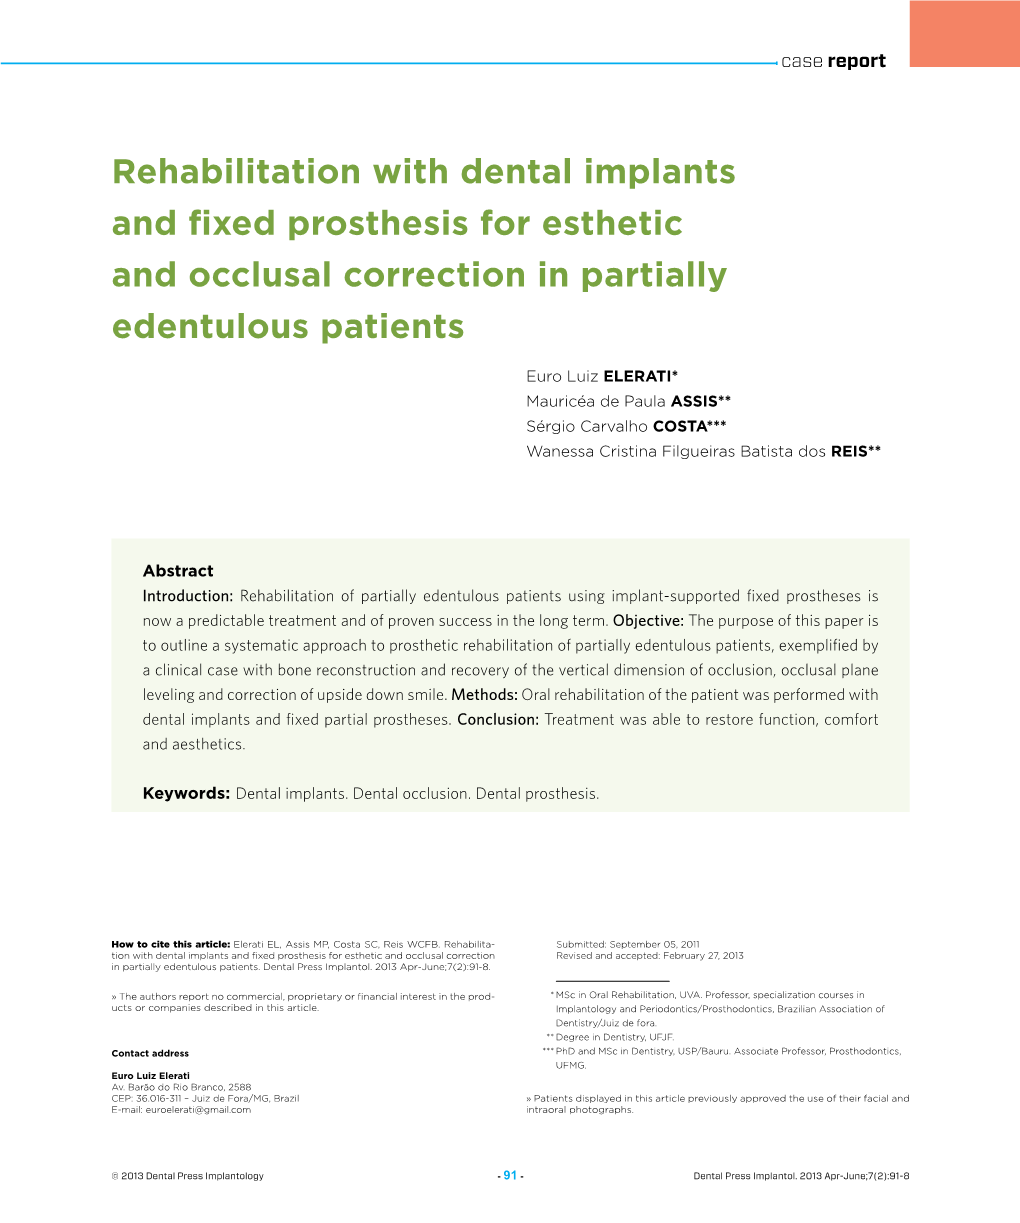 Rehabilitation with Dental Implants and Fixed Prosthesis for Esthetic And